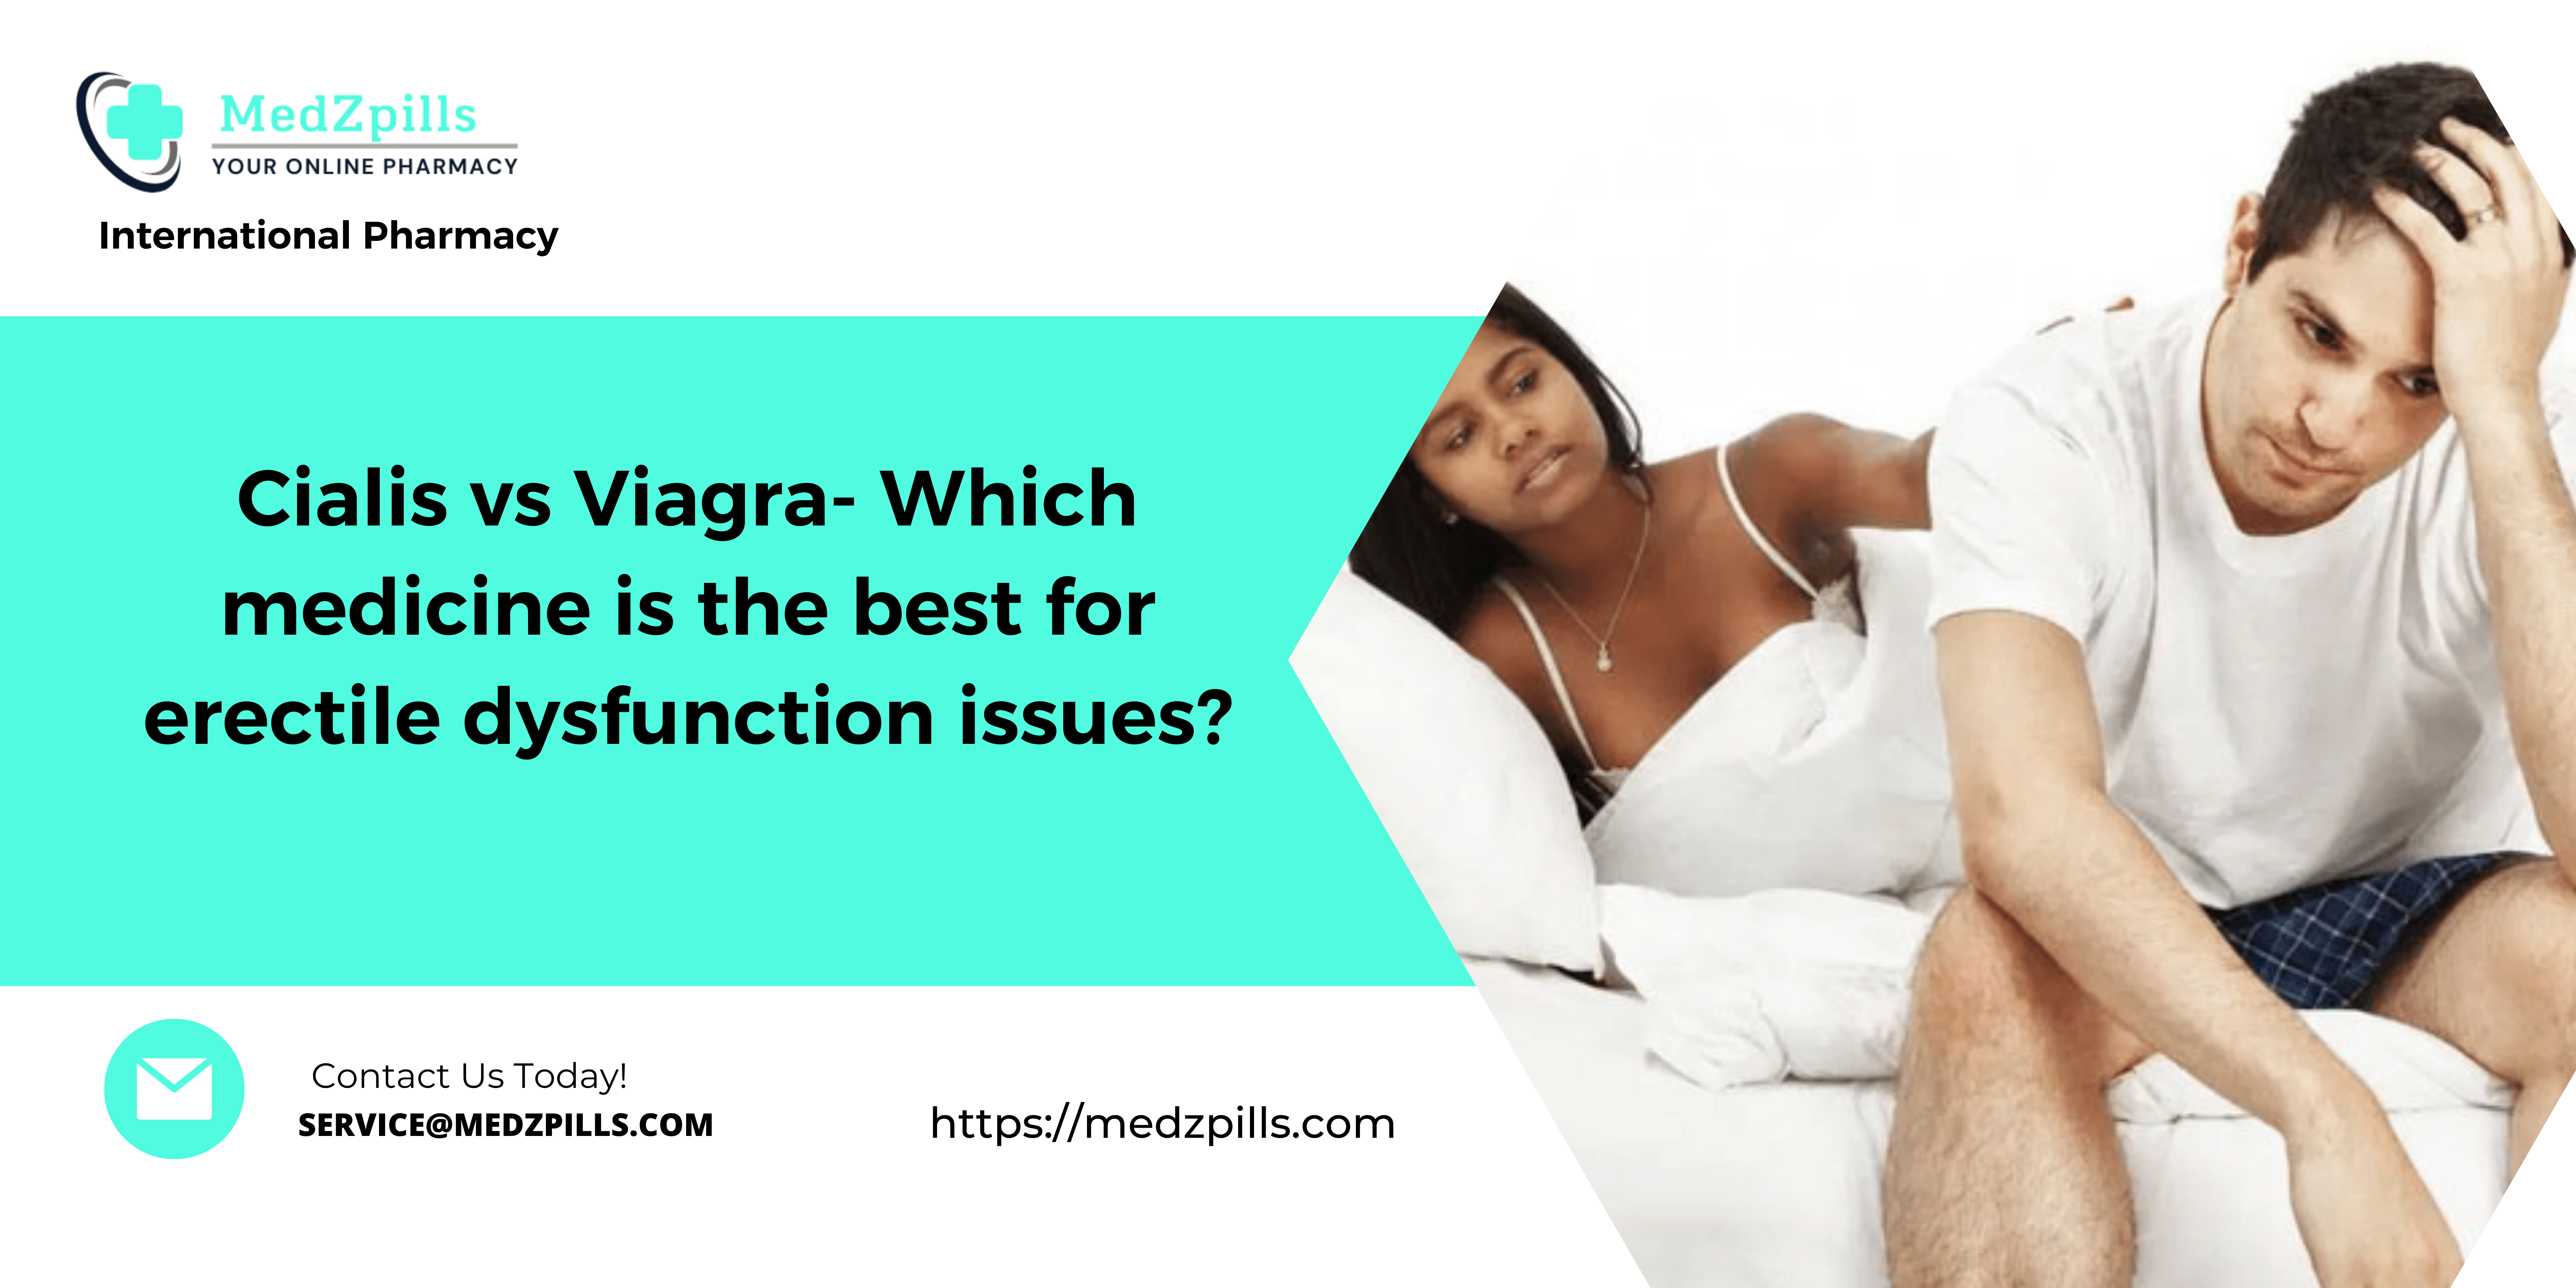 Cialis vs Viagra- Which medicine is the best for erectile dysfunction issues?